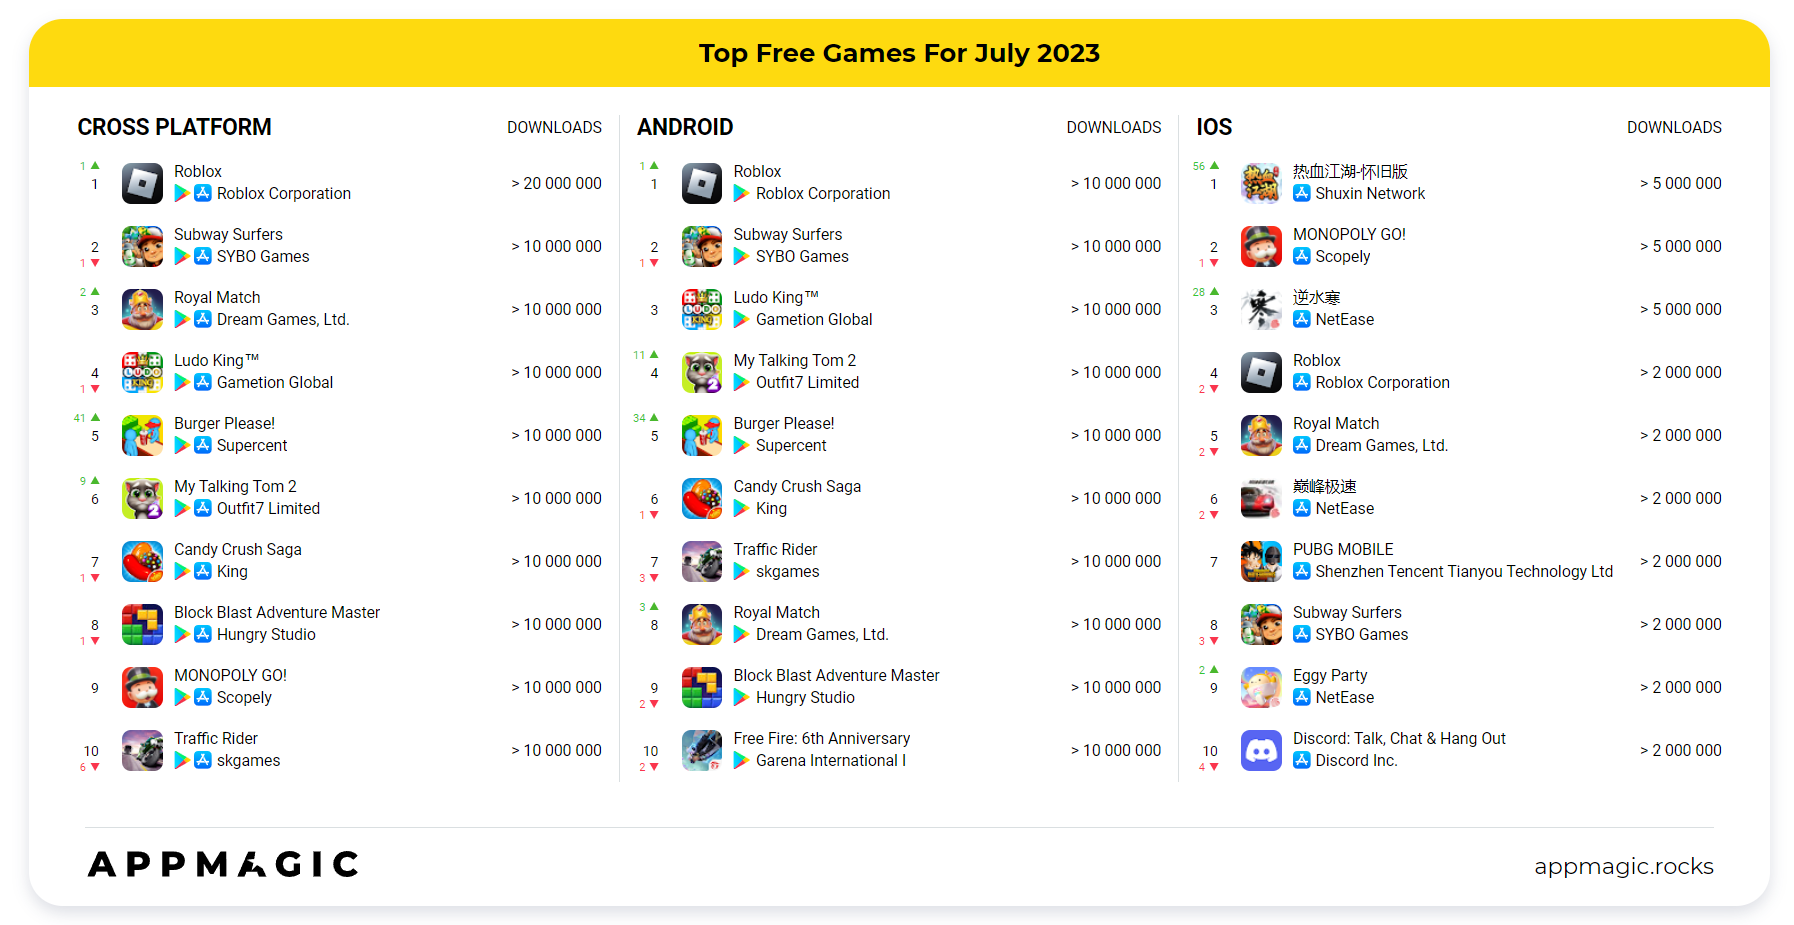 Leading free mobile game apps in Mexico in July 2023, based on